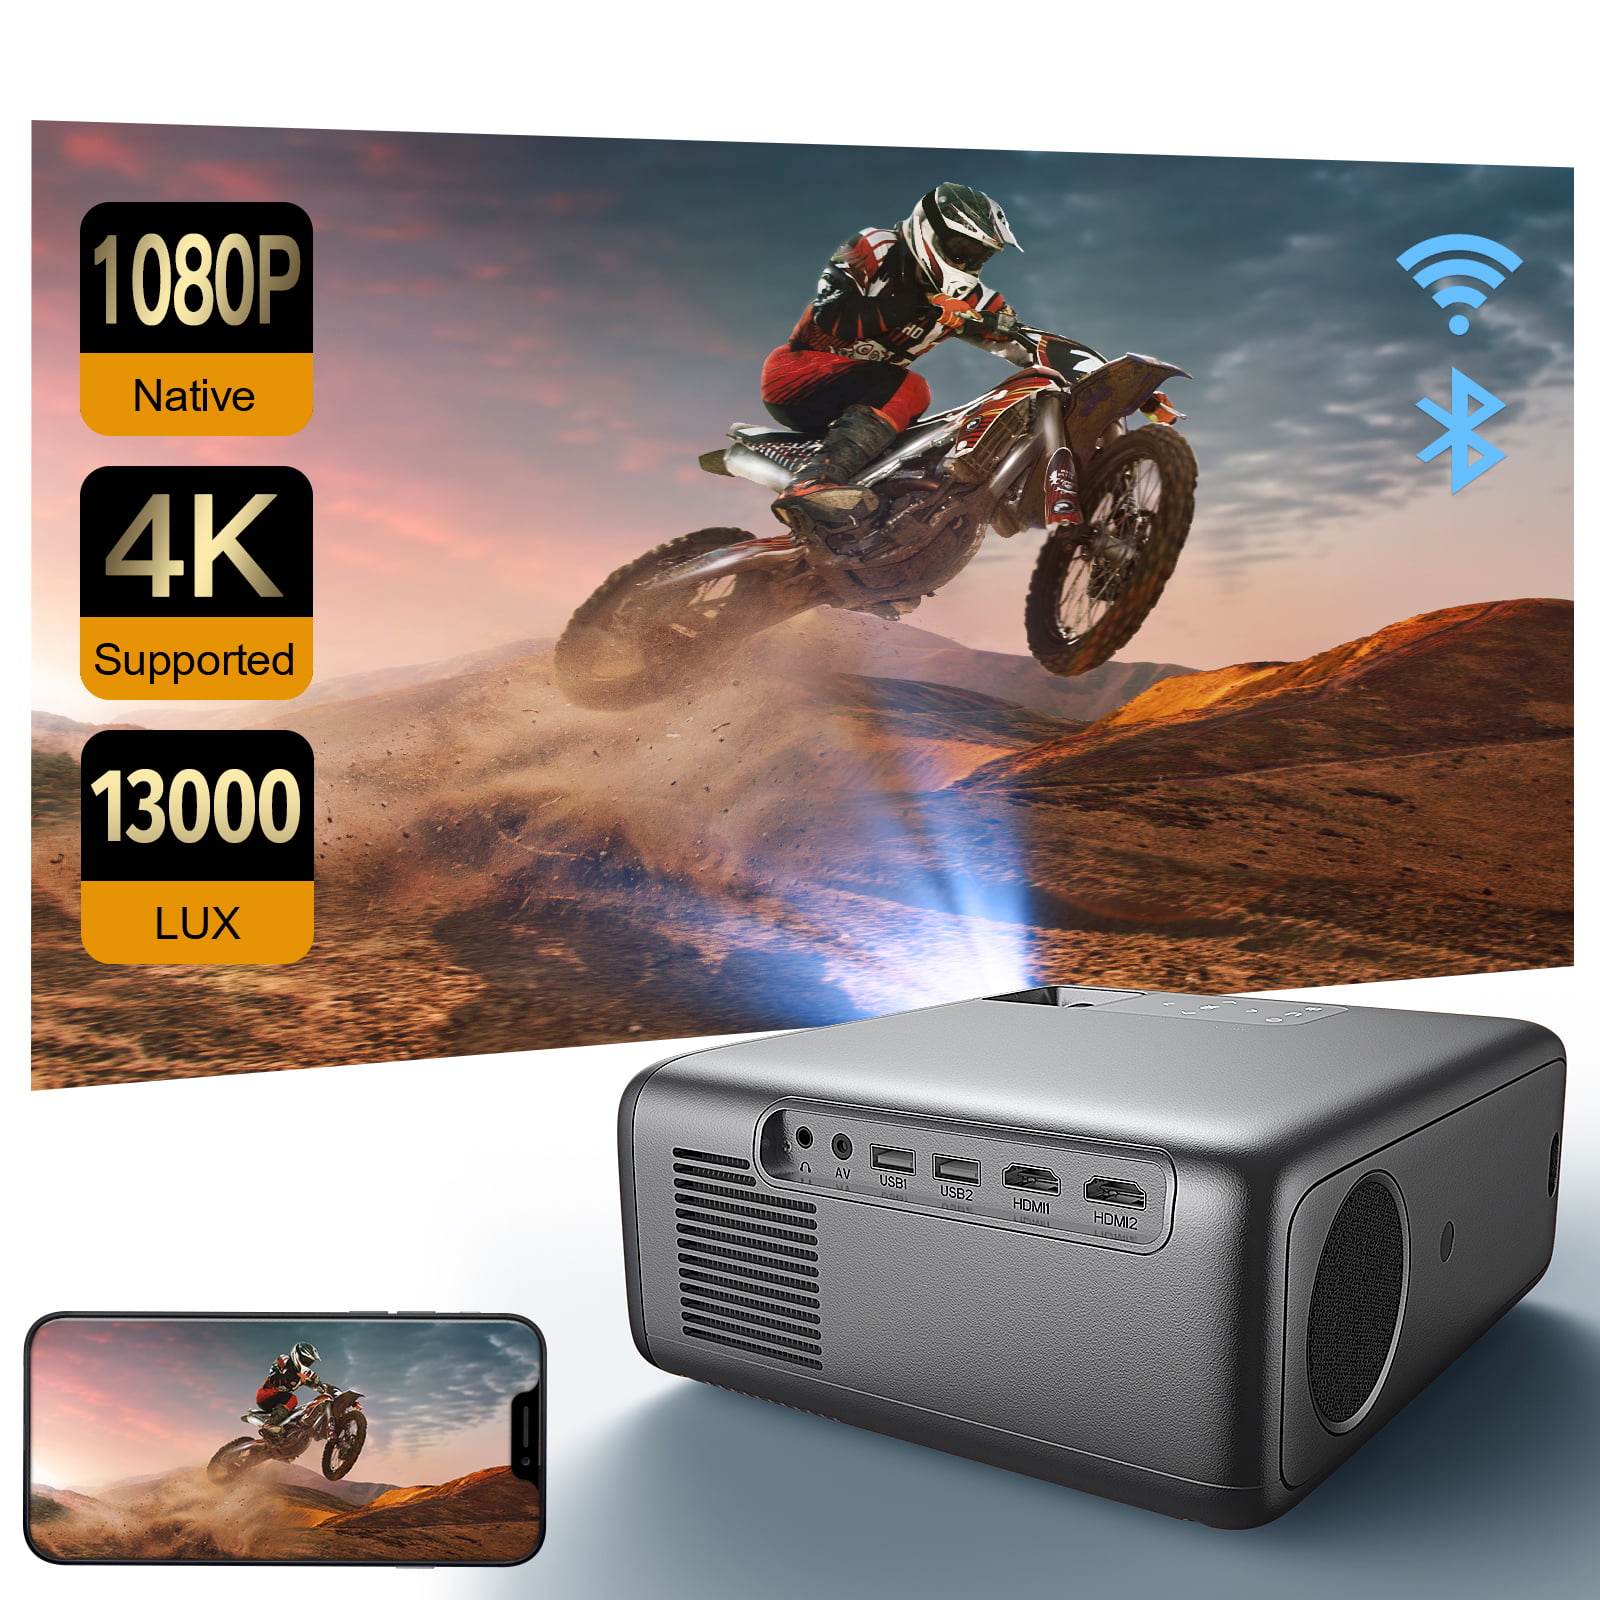 HD 1080P 8500L Home Outdoor Support 4K Movie Video Projector Max 300 Display WeChip Portable Projector Compatible with HDMI,VGA,Laptop,iOS & Android Smartphone Projector with 5G WiFi and Bluetooth 